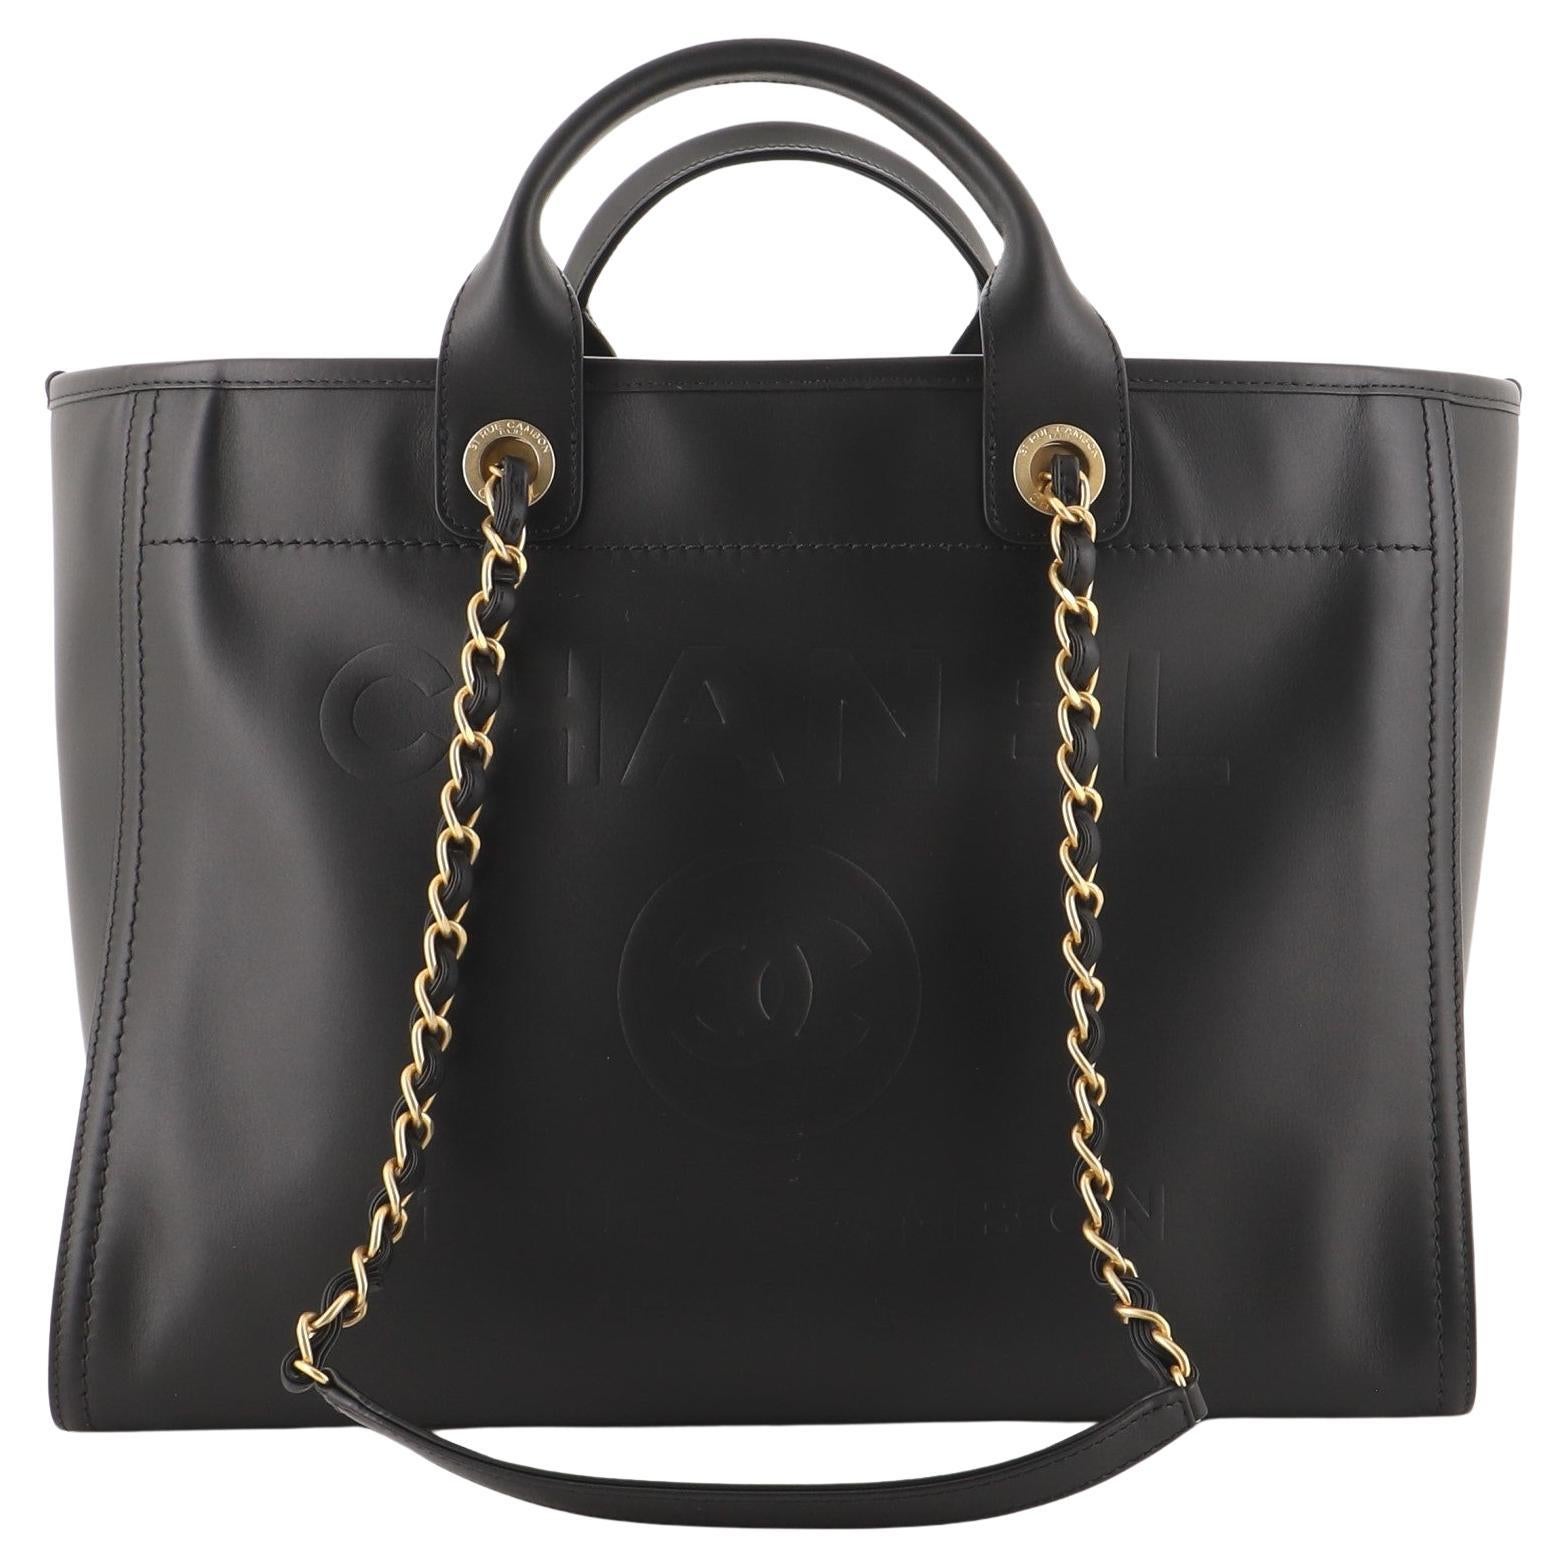 CHANEL DEAUVILLE LEATHER LARGE SHOPPER BLACK WITH GOLD HARDWARE. SOLD OUT .